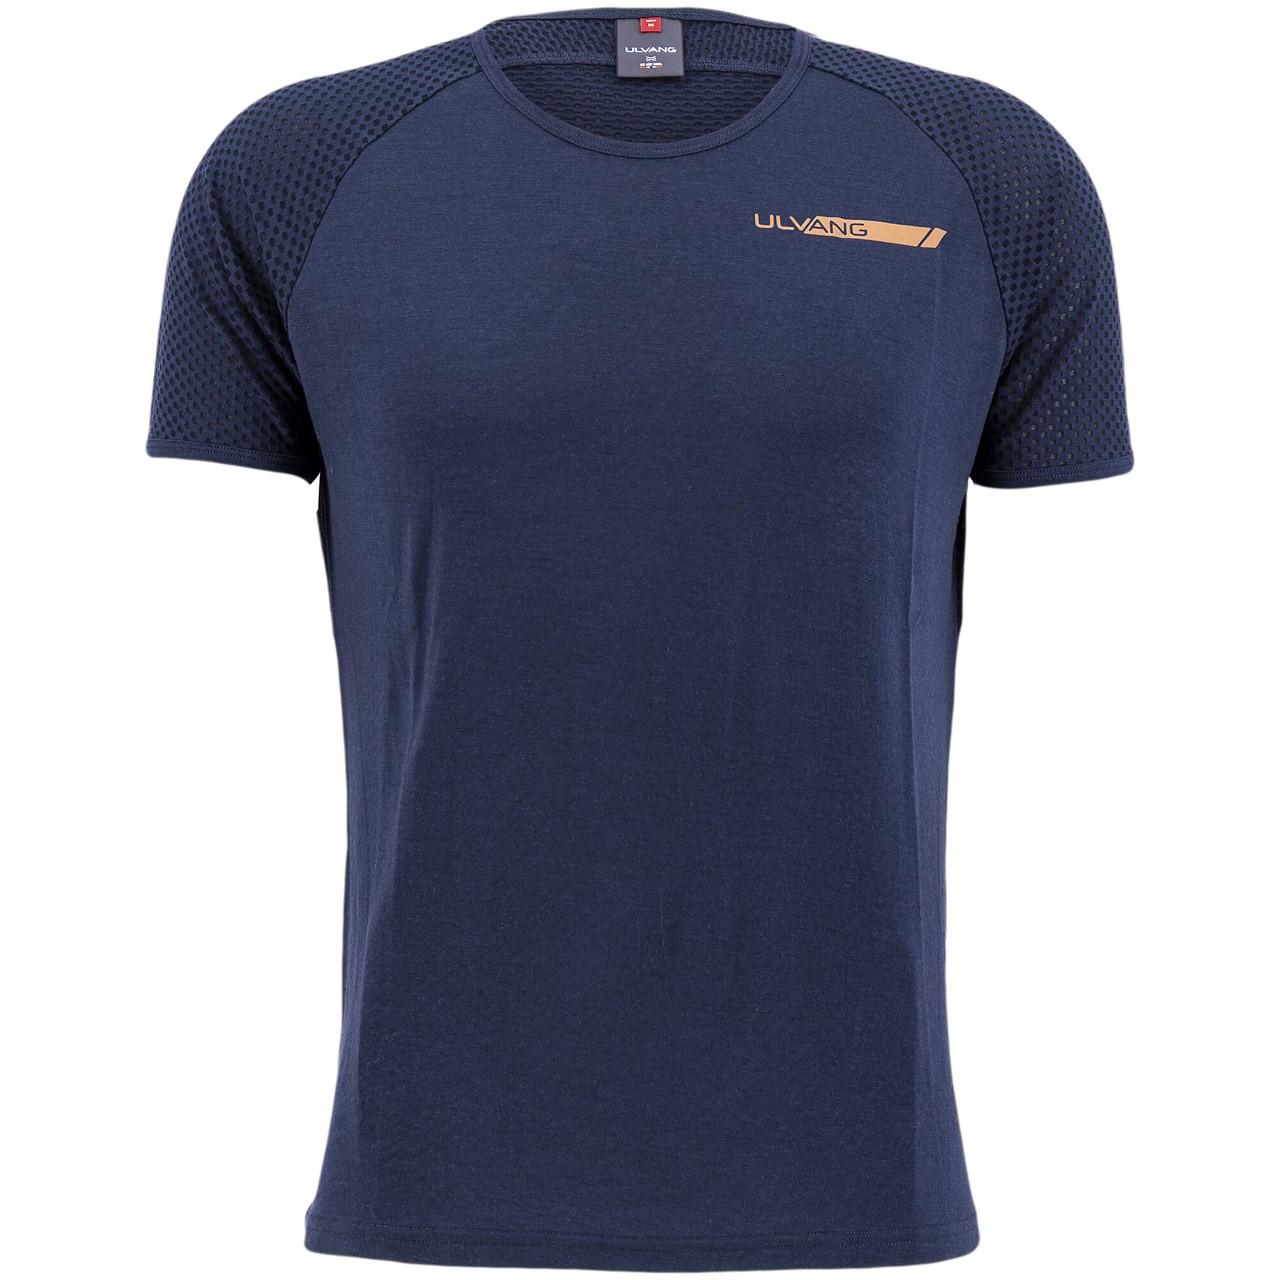 Ulvang Pace Ms T-shirt